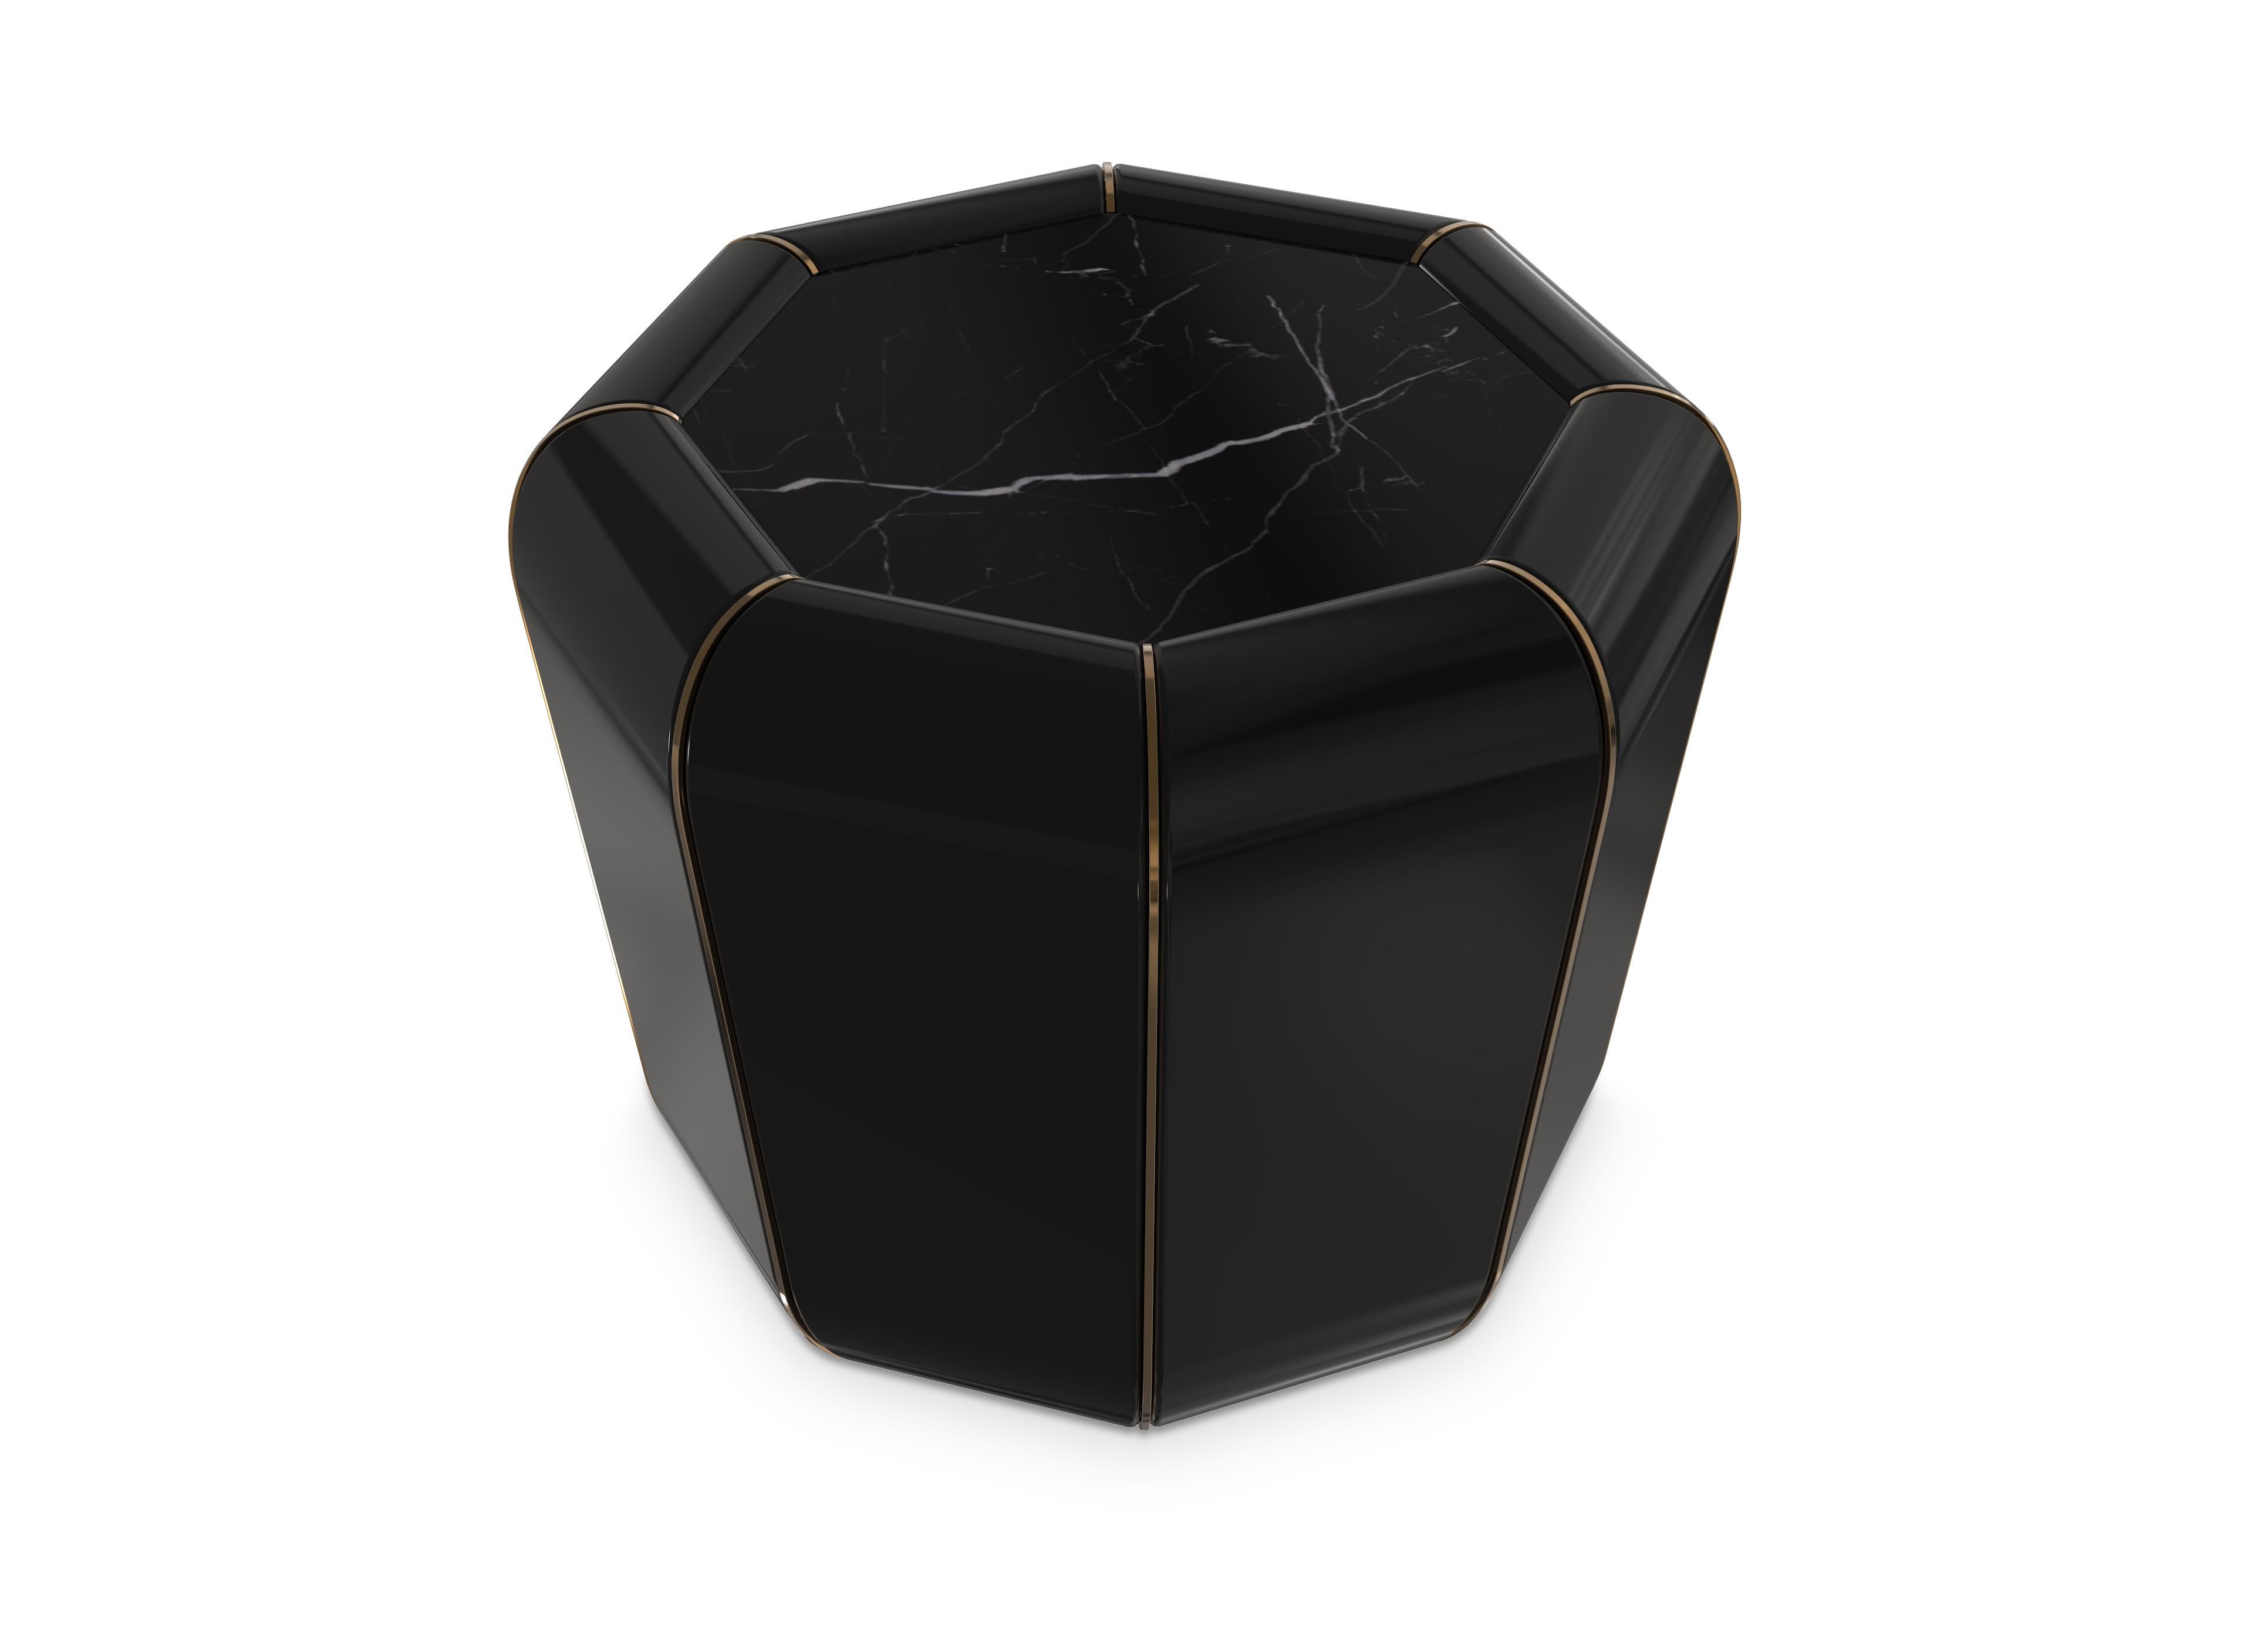 Darian is a luxurious round side table, impotent and lavish. Resonates elegance in its luxurious silhouette with the composed blend of Nero Marquina marble, involved with fine gold plated brass detailing. This luxury item adapts perfectly to any